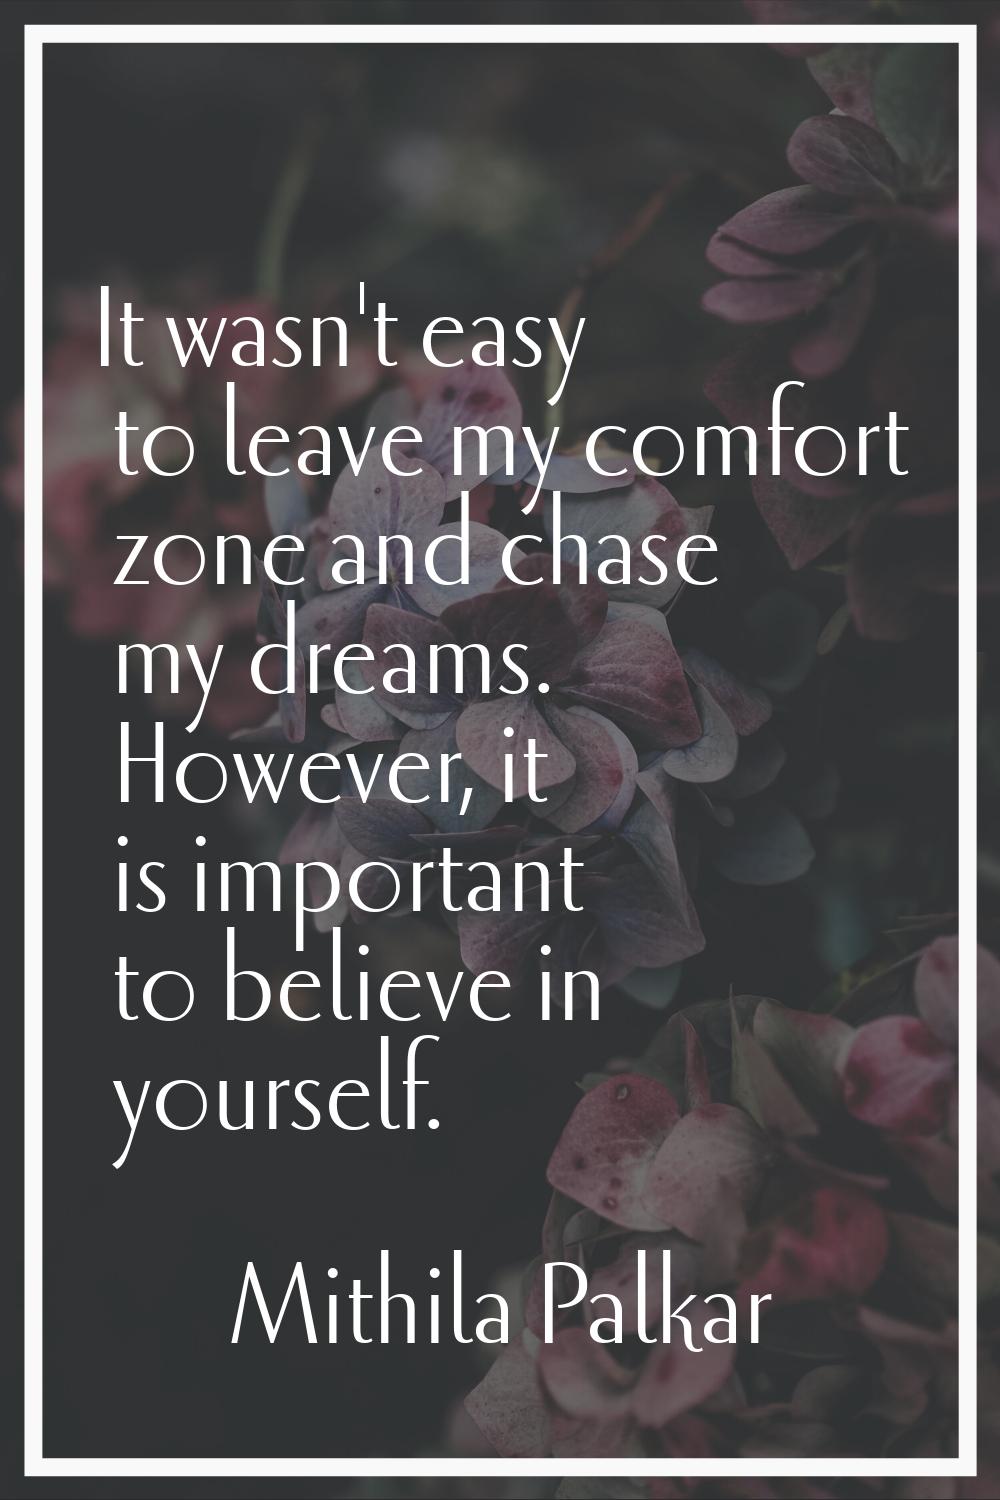 It wasn't easy to leave my comfort zone and chase my dreams. However, it is important to believe in